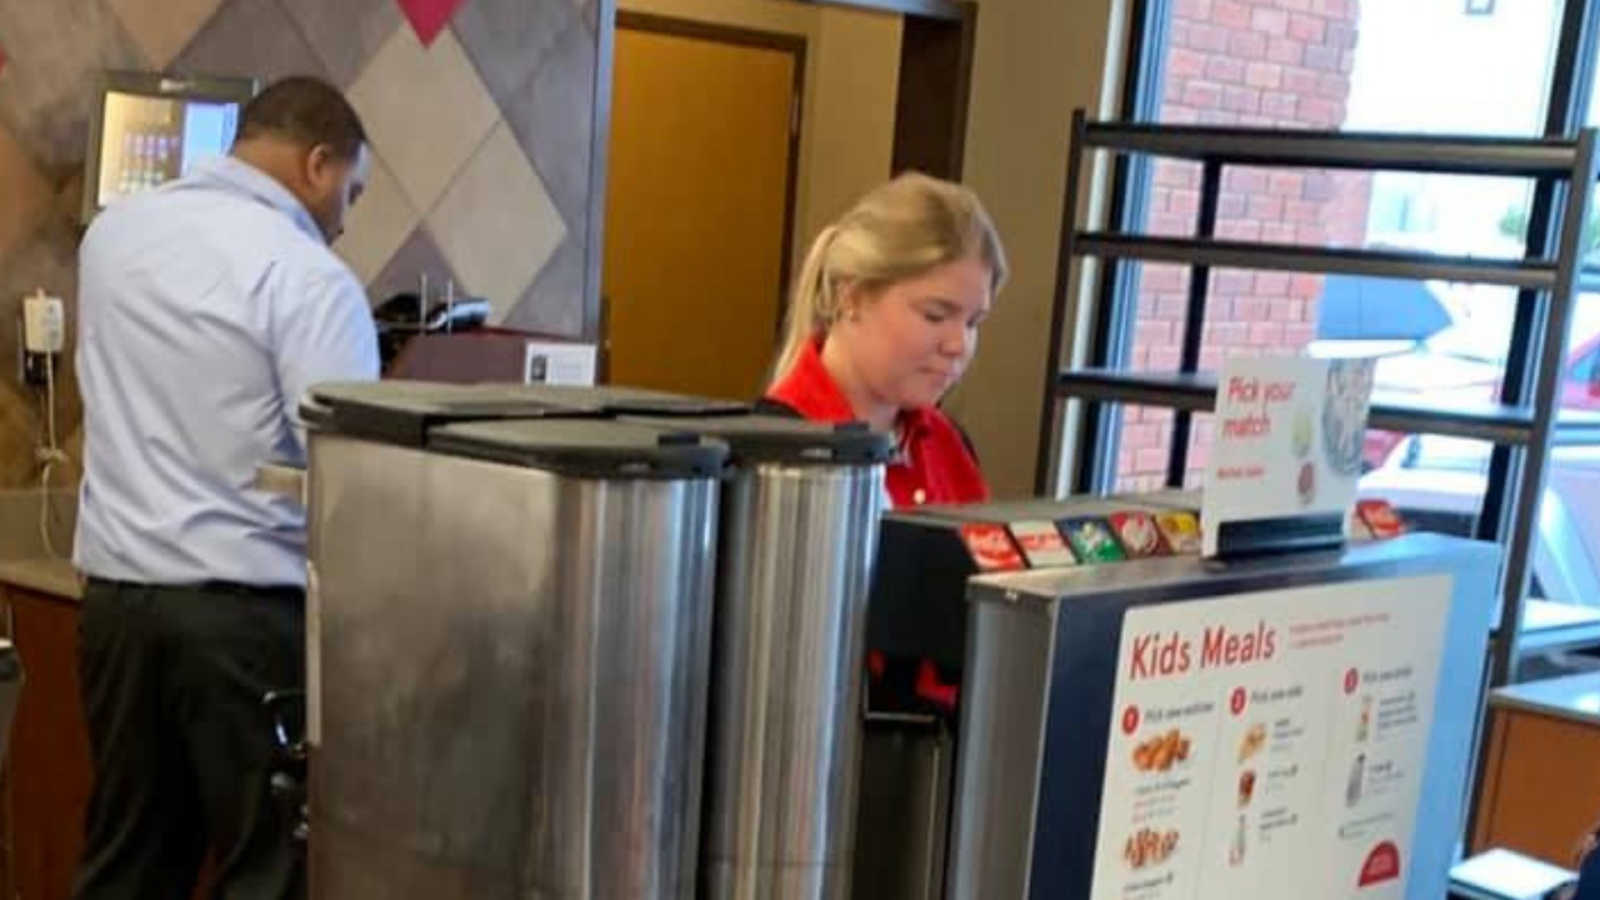 chick fil a employee commits act of kindness and pays for man's meal